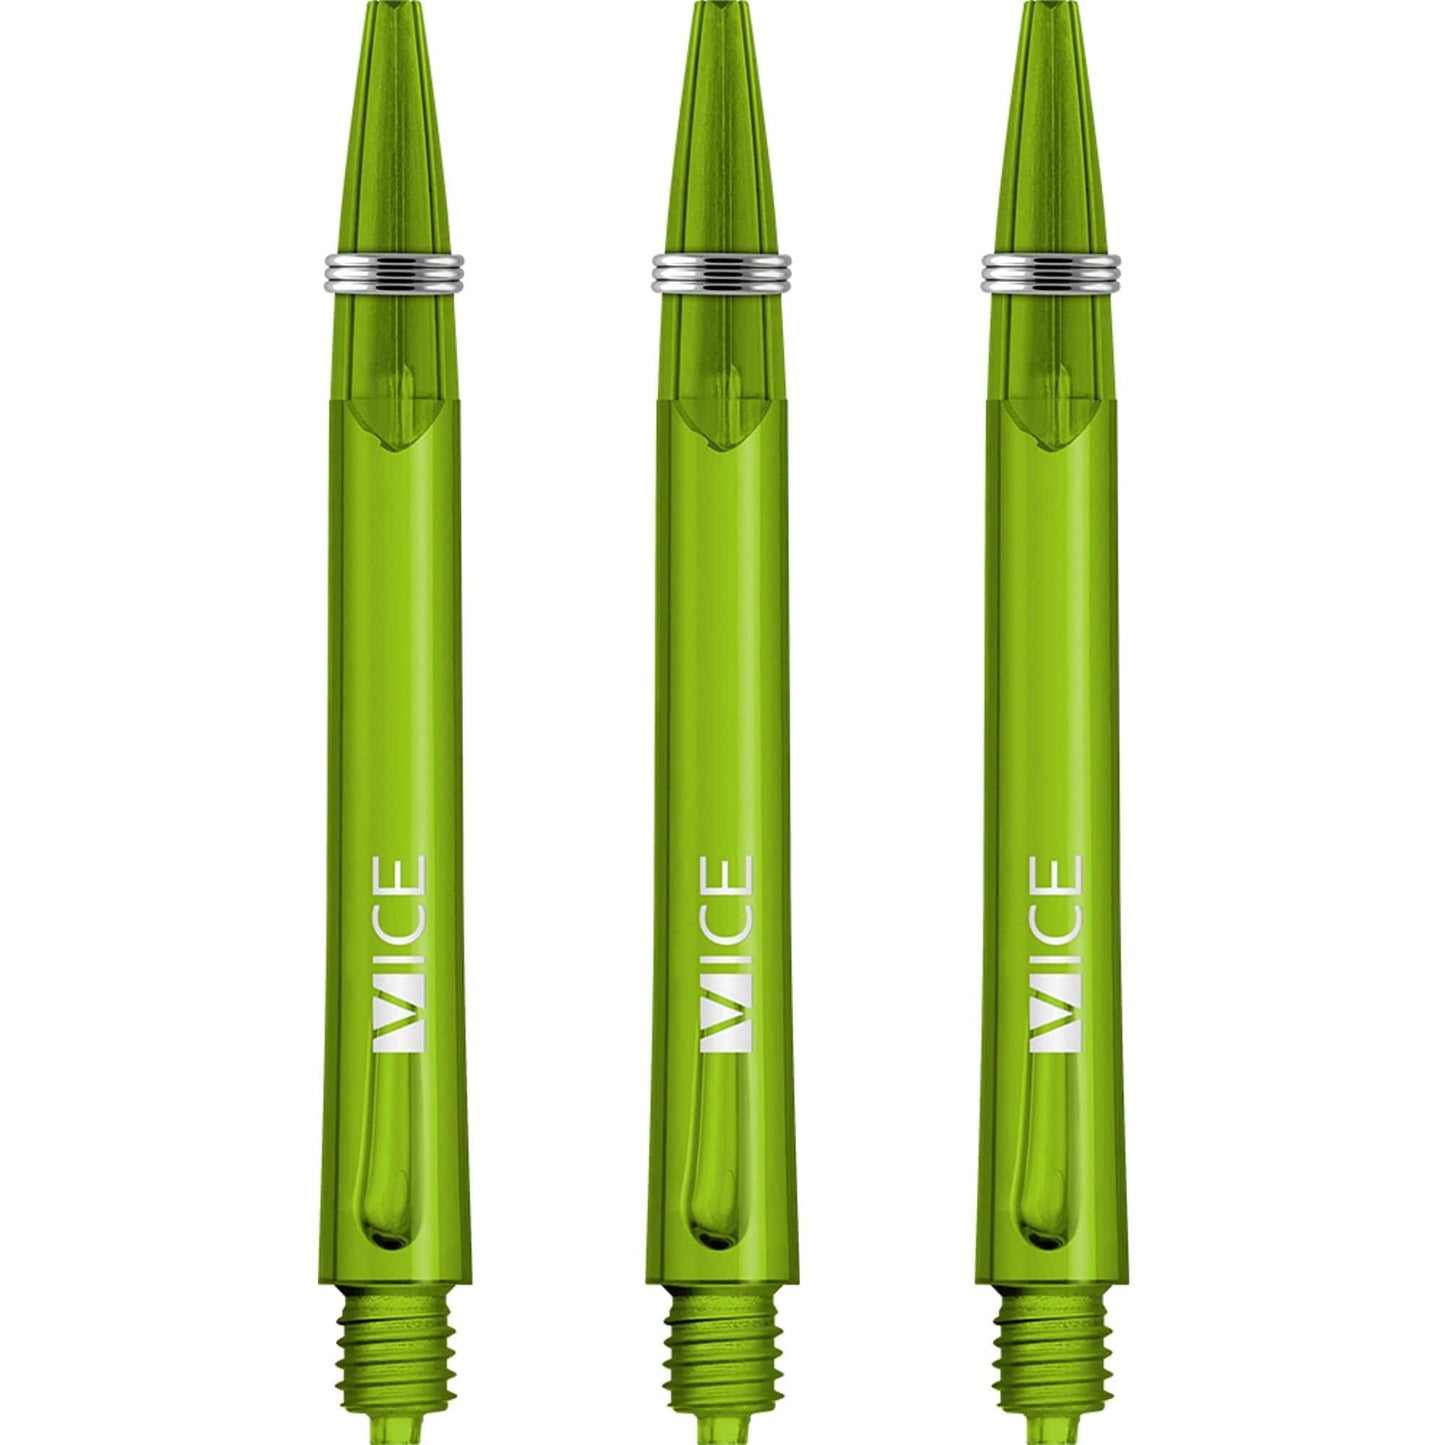 One80 Vice Shafts - Stems with Springs - Green Medium